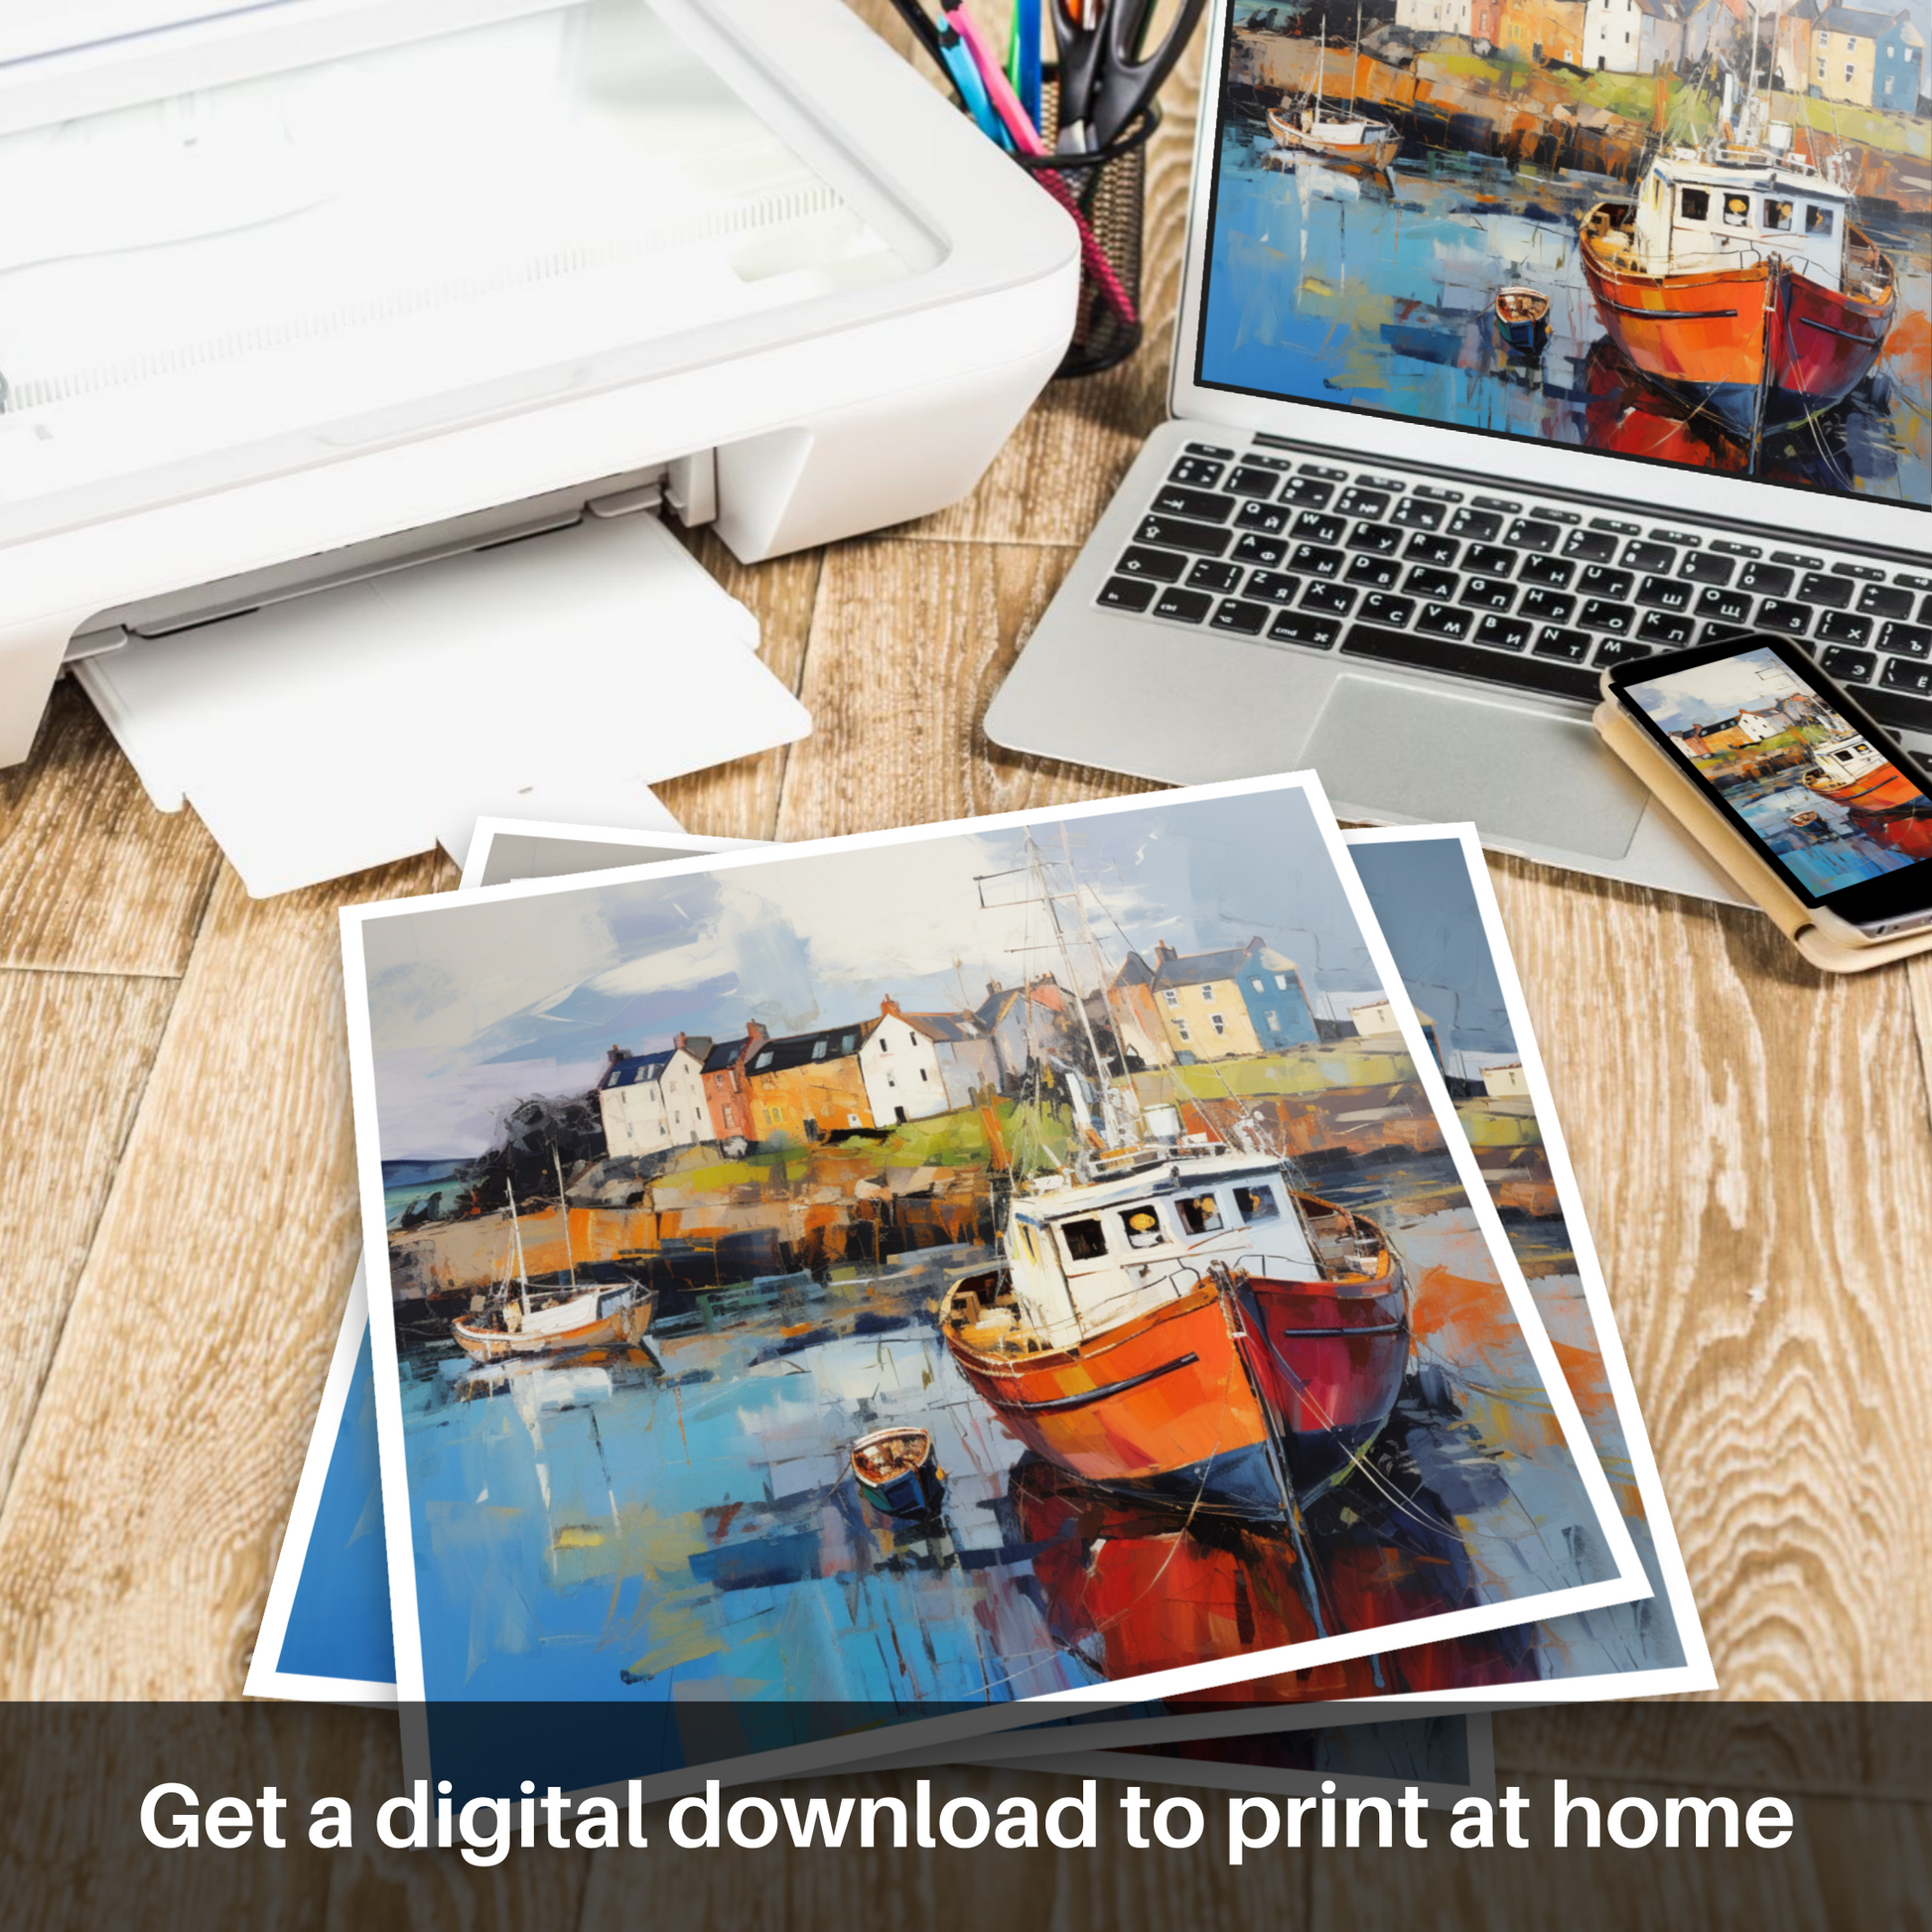 Downloadable and printable picture of Millport Harbour, Isle of Cumbrae